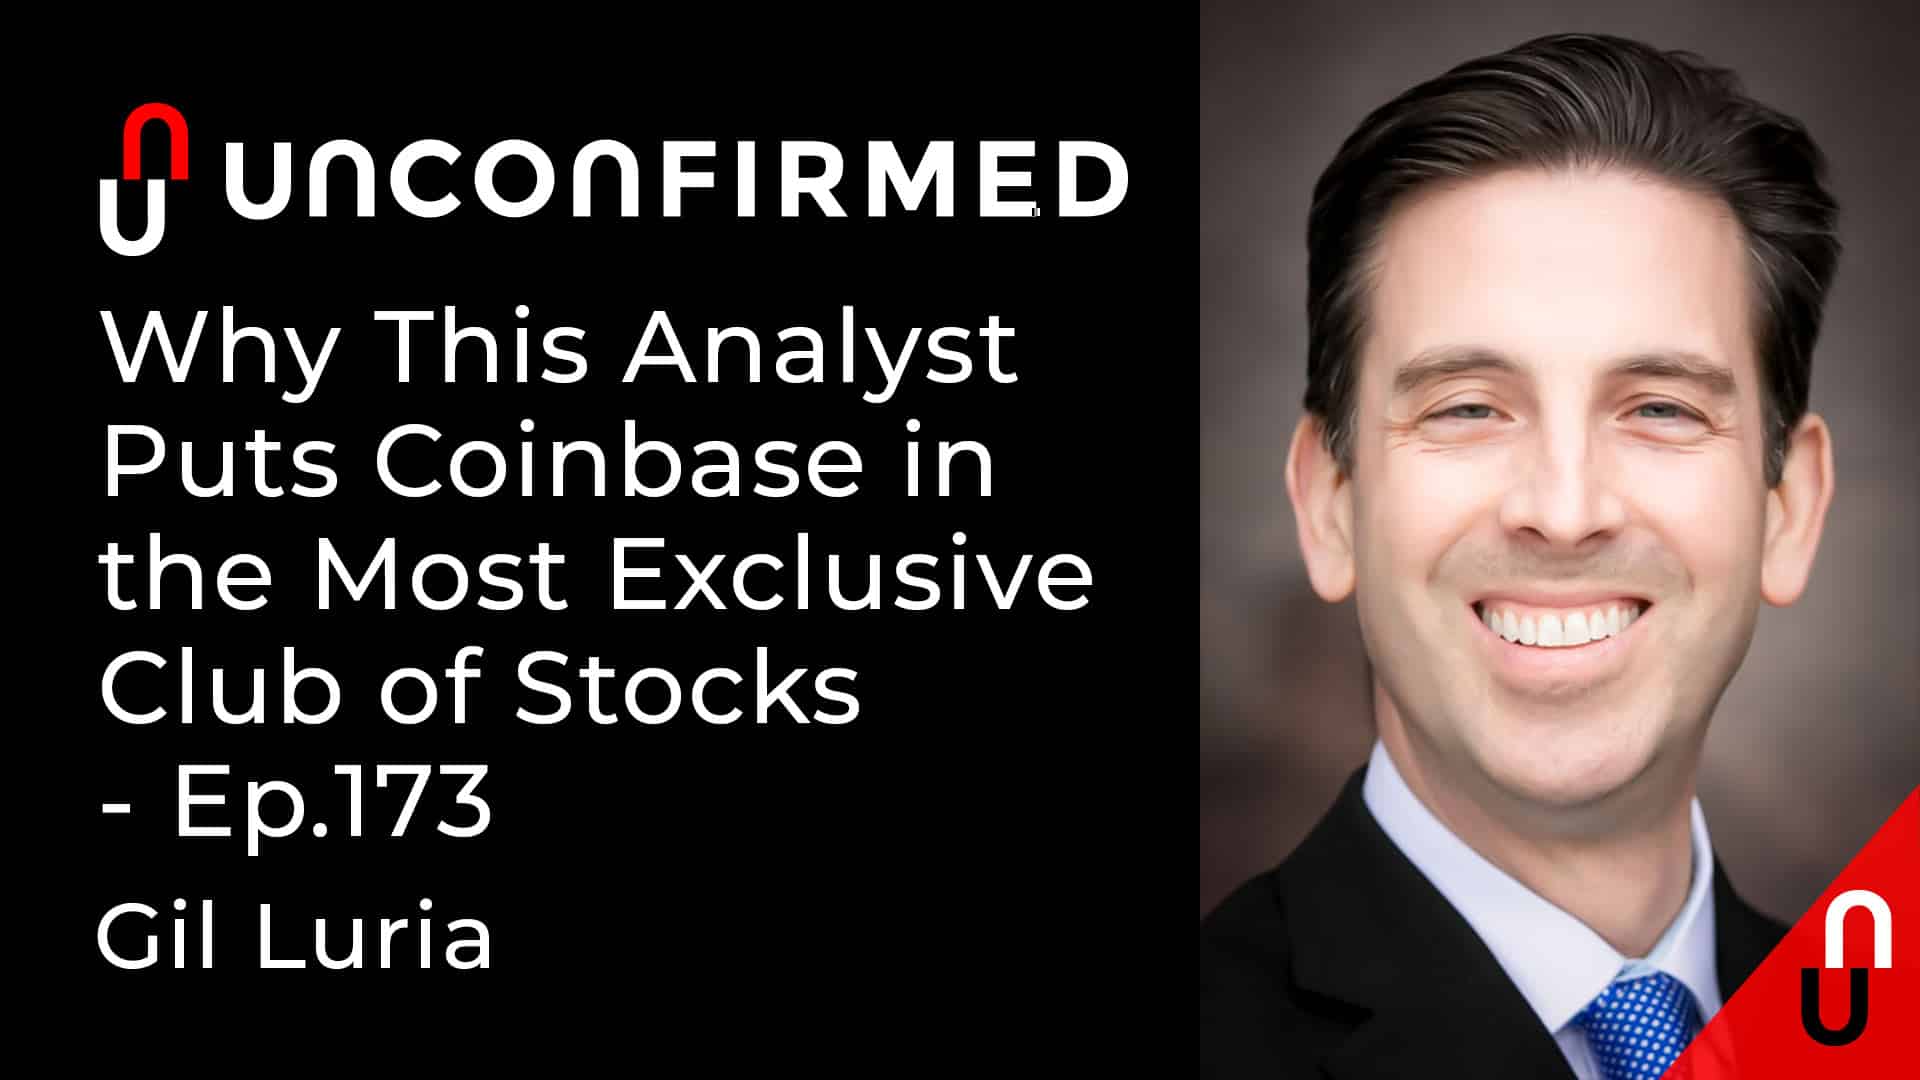 Unconfirmed - Ep.173 - Why This Analyst Puts Coinbase in the Most Exclusive Club of Stocks